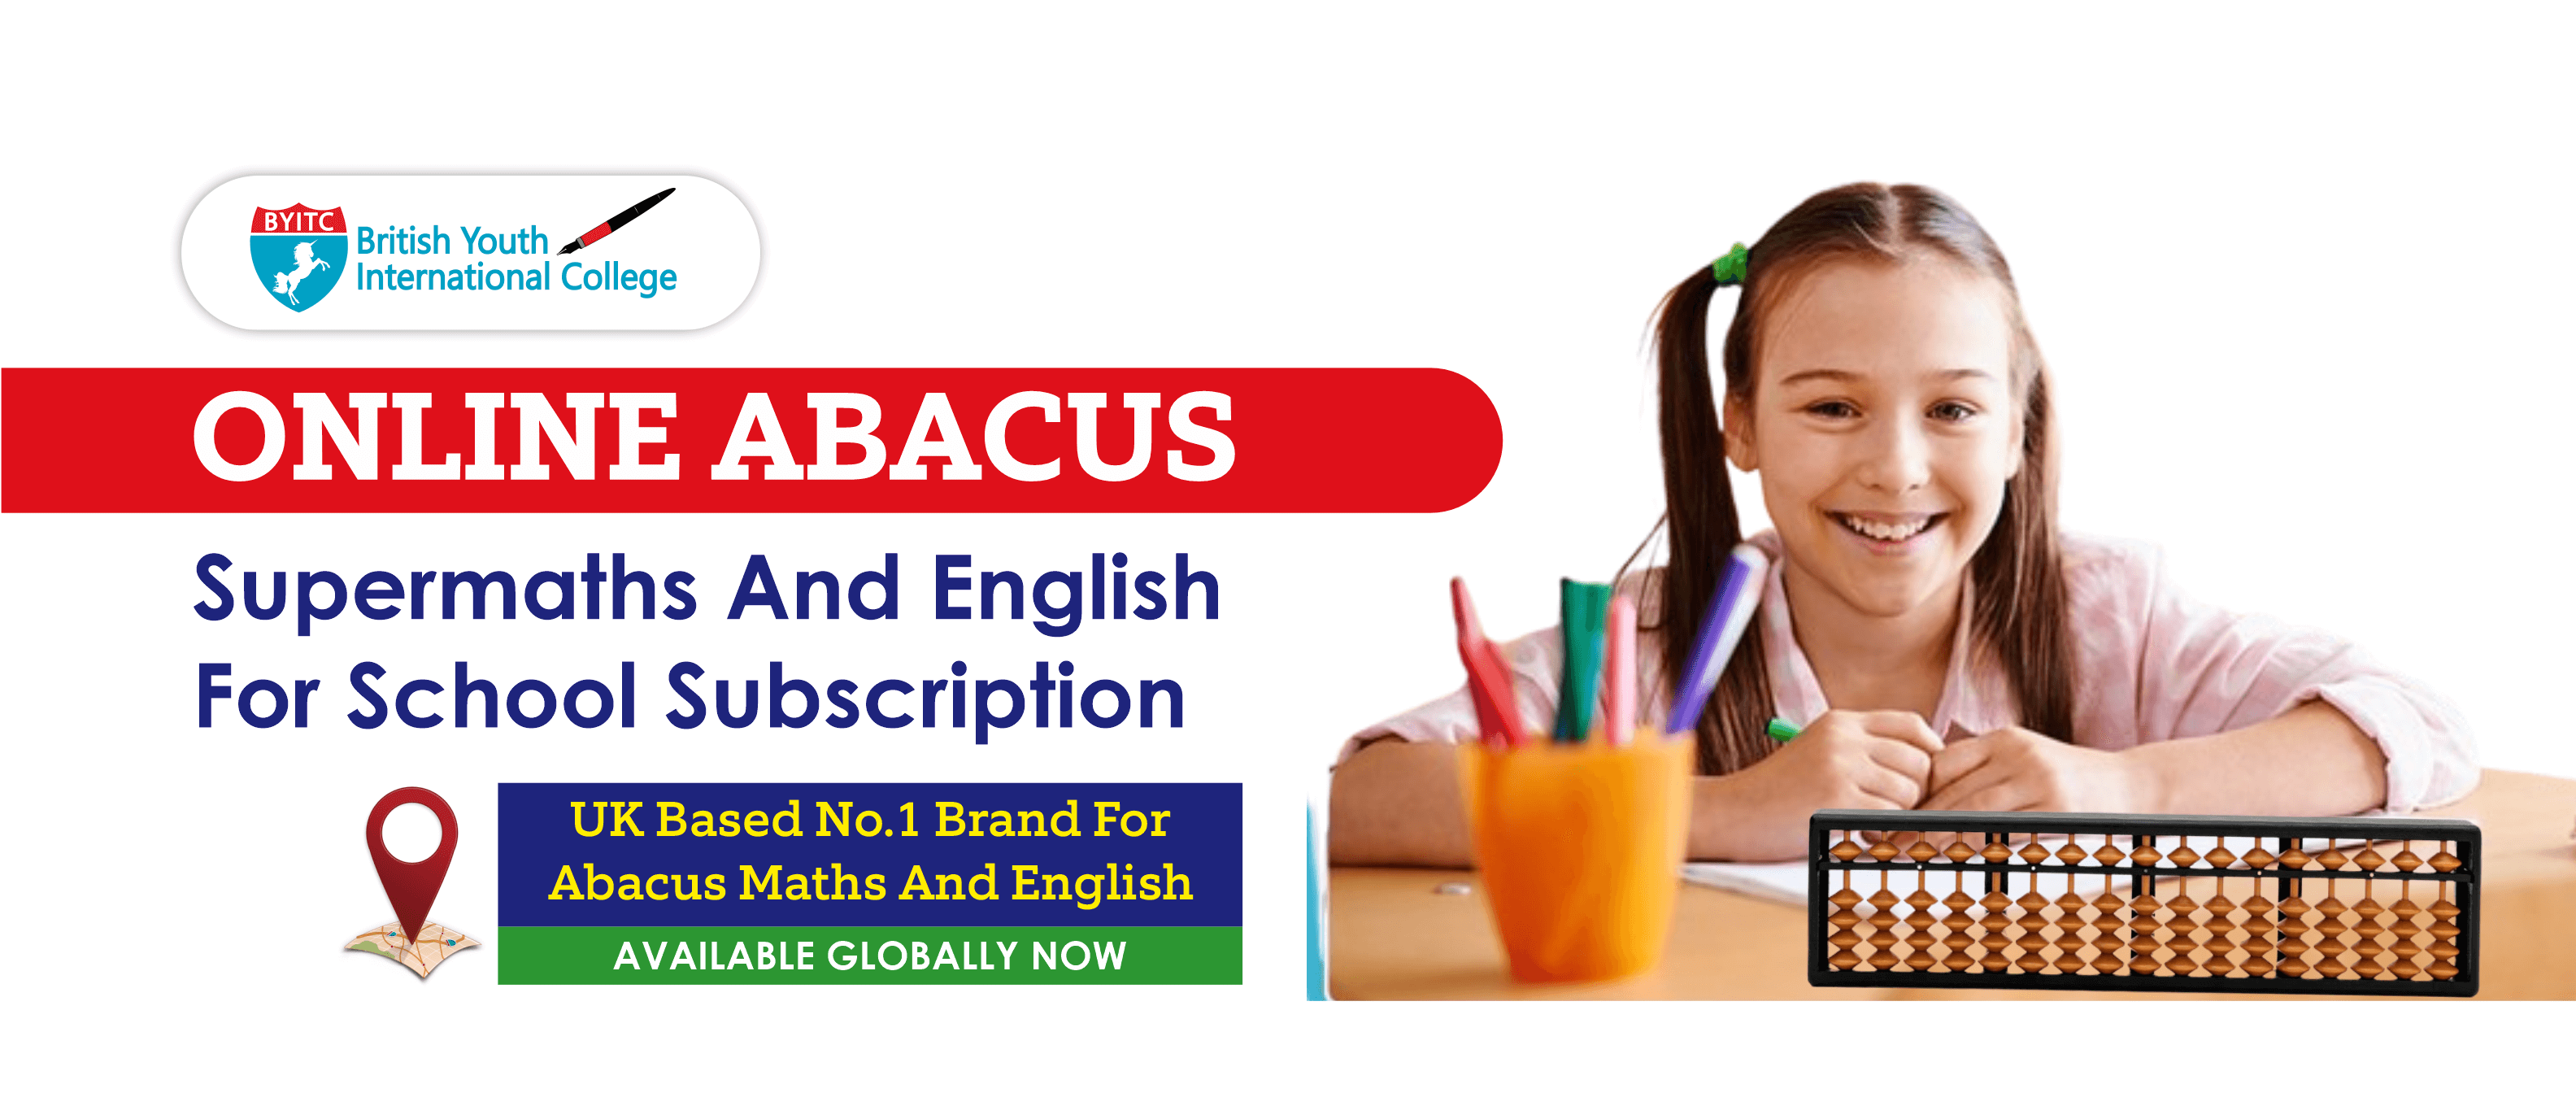 Online Abacus Supermaths and English for Schools Subscription